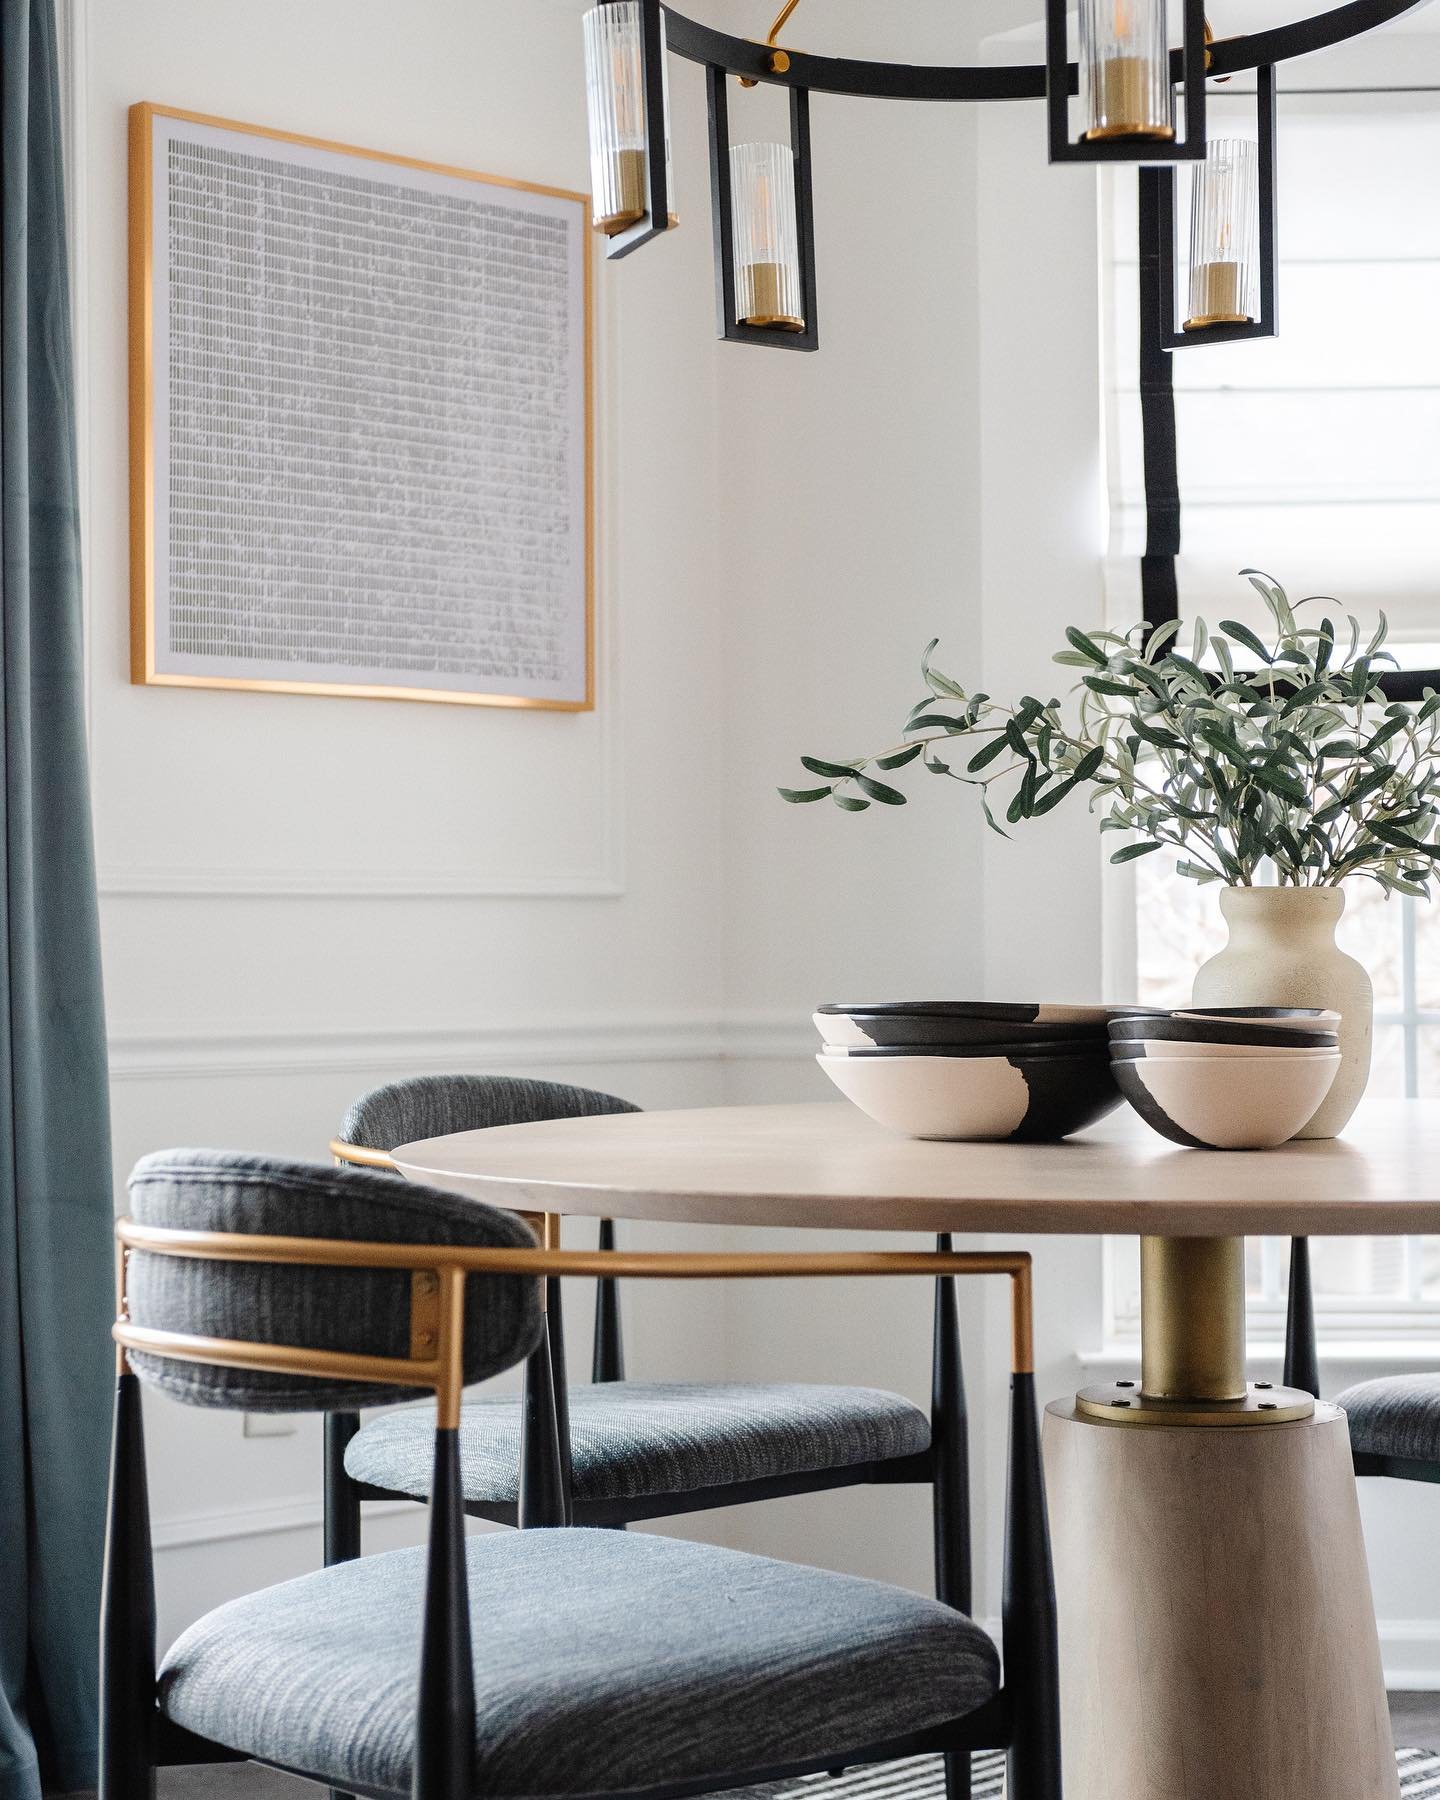 Embracing simplicity and sophistication in this modern neutral dining room design. Neutral tones and clean lines create a serene atmosphere perfect for gathering with loved ones. 

📸: @satokobergphotography 
.
.
.
#ModernInteriors #neutraldecor #din